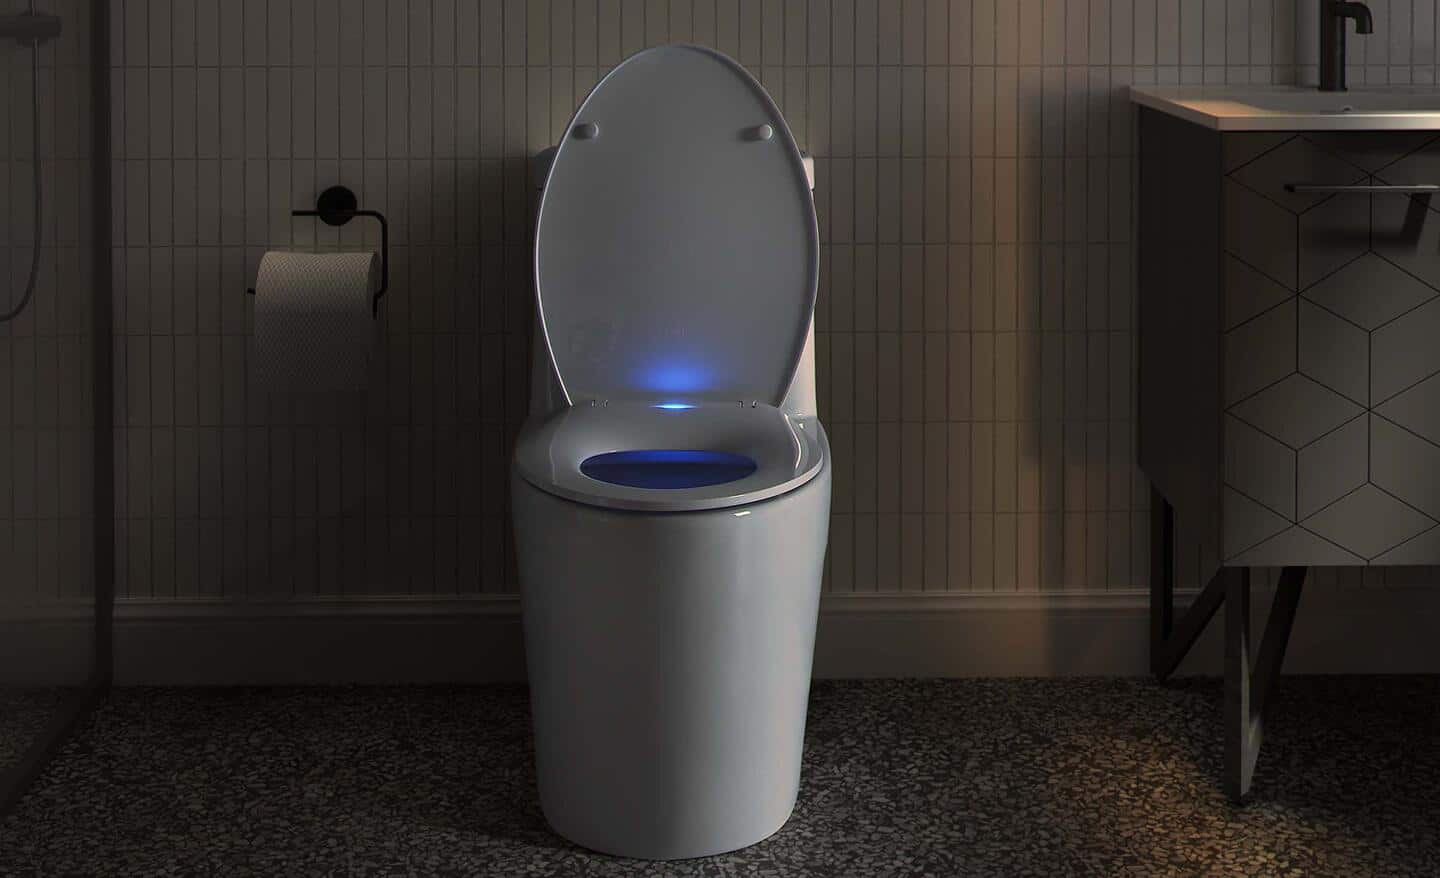 A modern toilet featuring a lighted toilet seat.